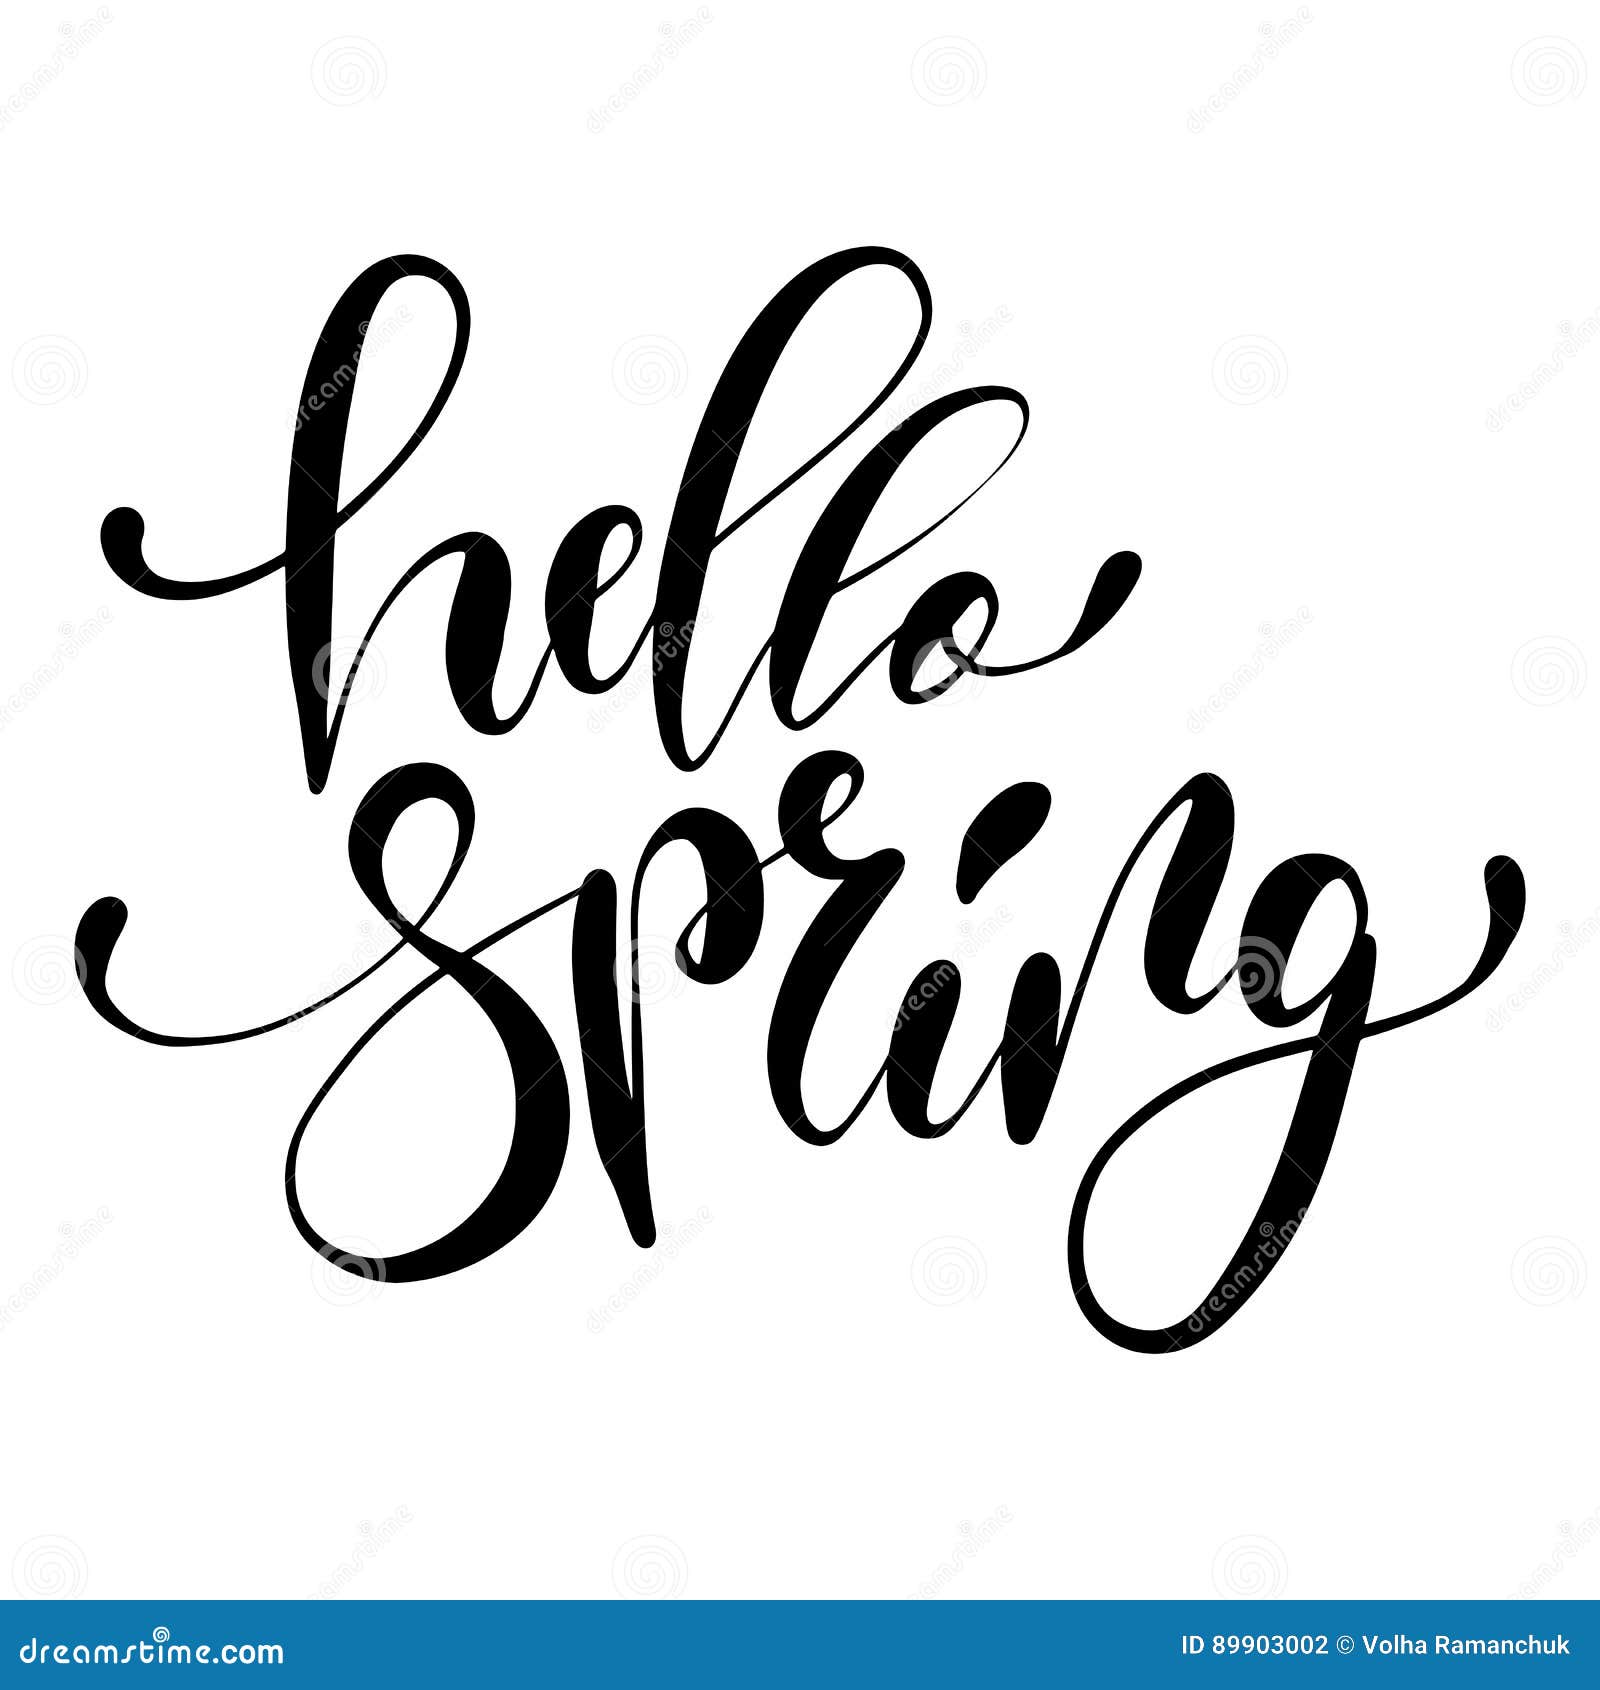 Hello Spring Hand Drawn Lettering Design Isolated on a White Background ...